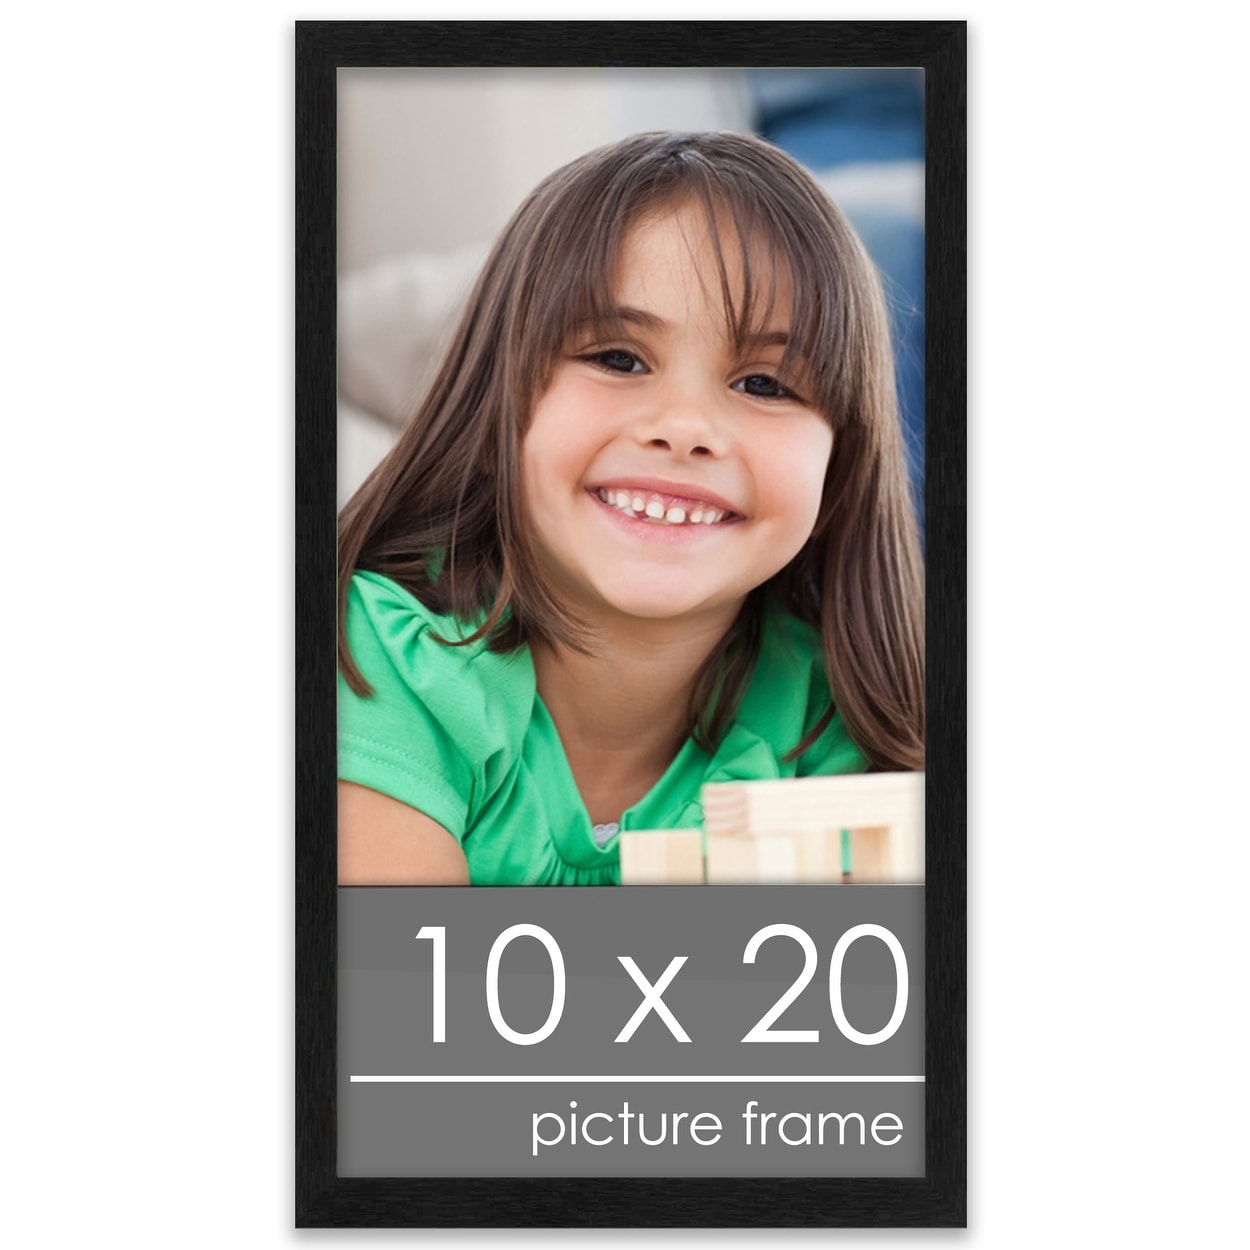 10x20 Black Picture Frame - Wood Picture Frame Complete with UV